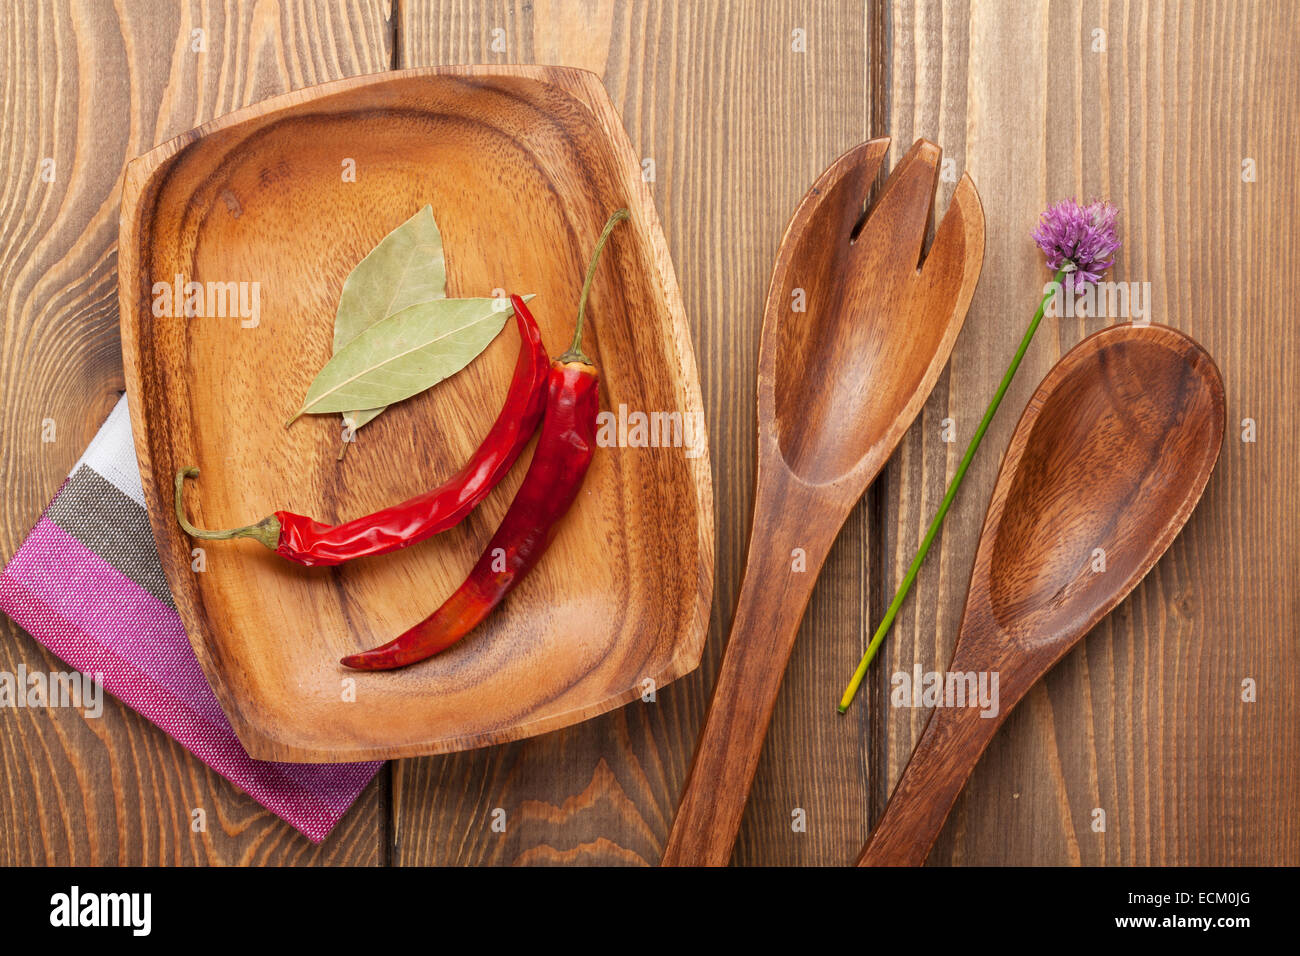 Spices and cooking utensils over wooden table Stock Photo